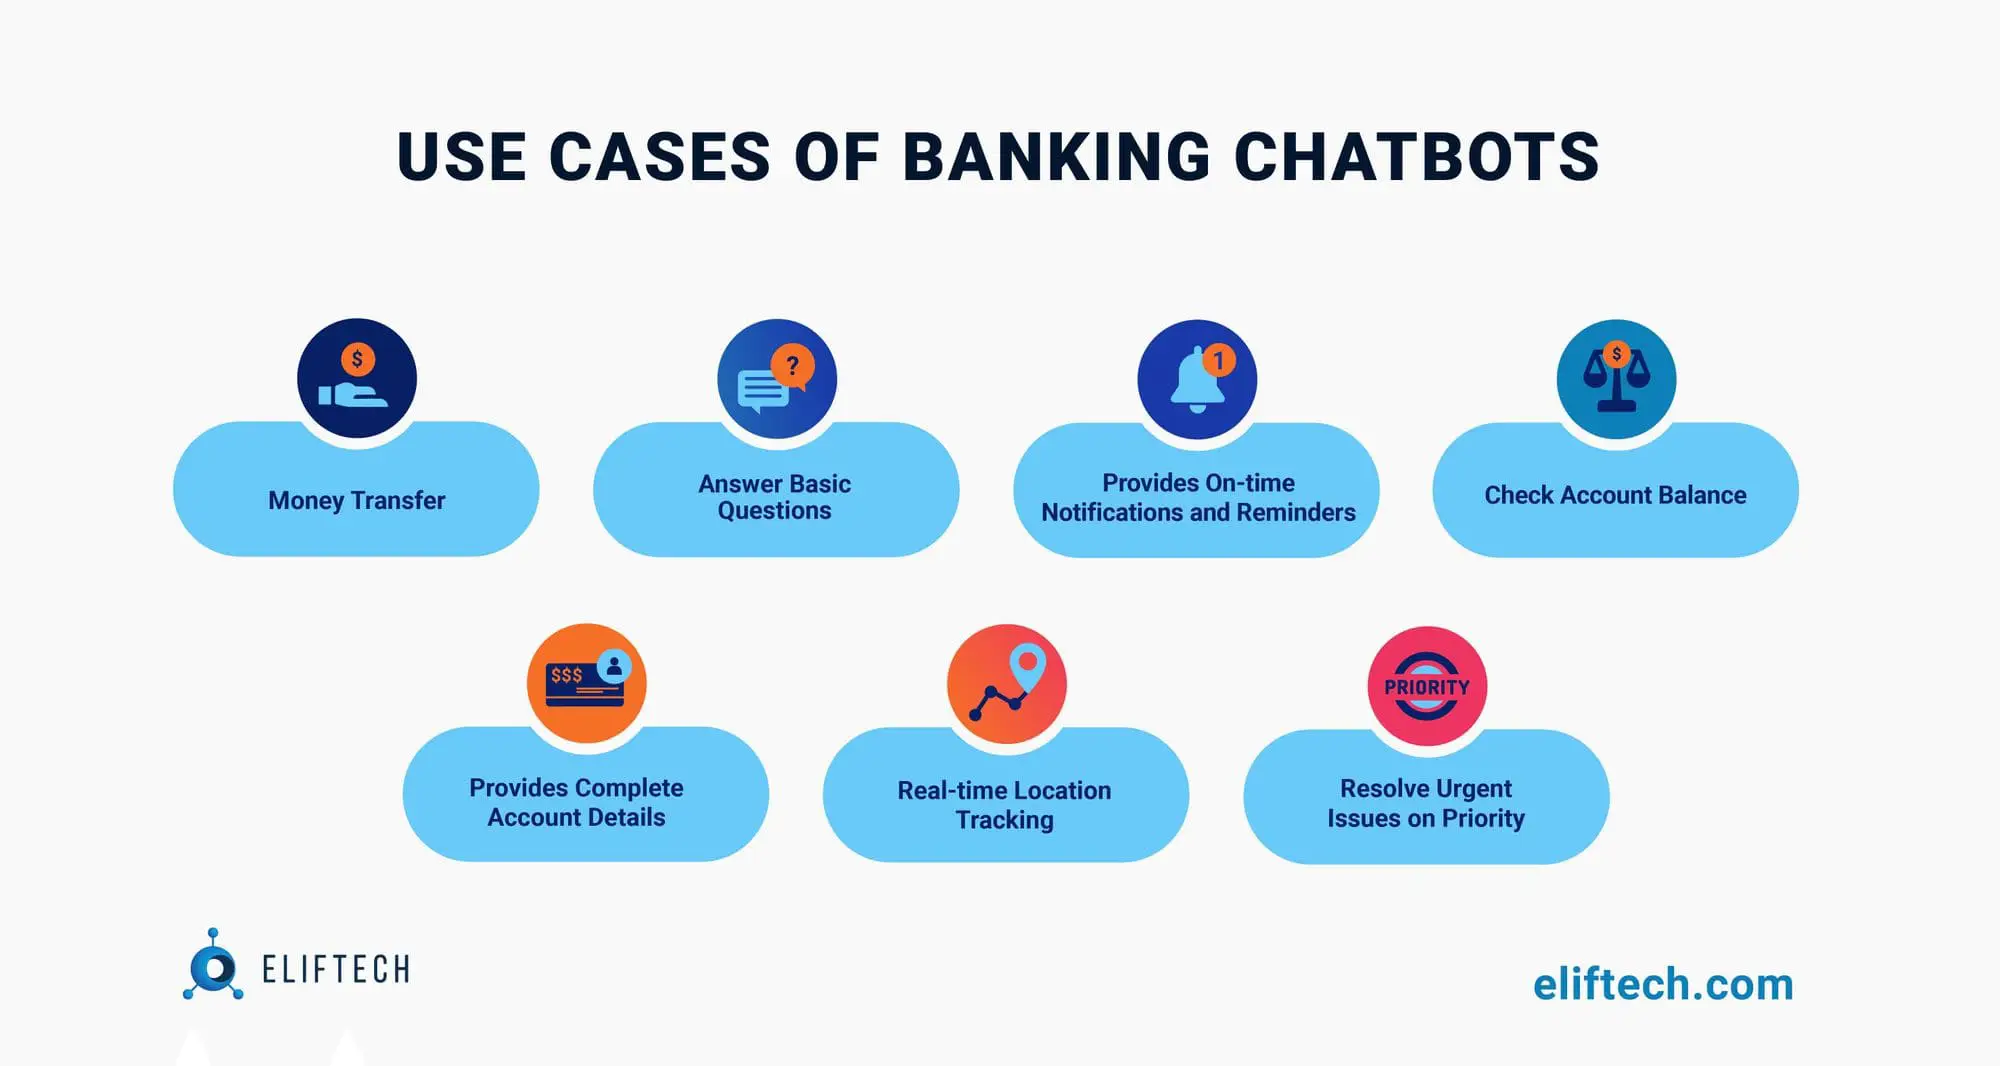 Use cases of banking chatbots